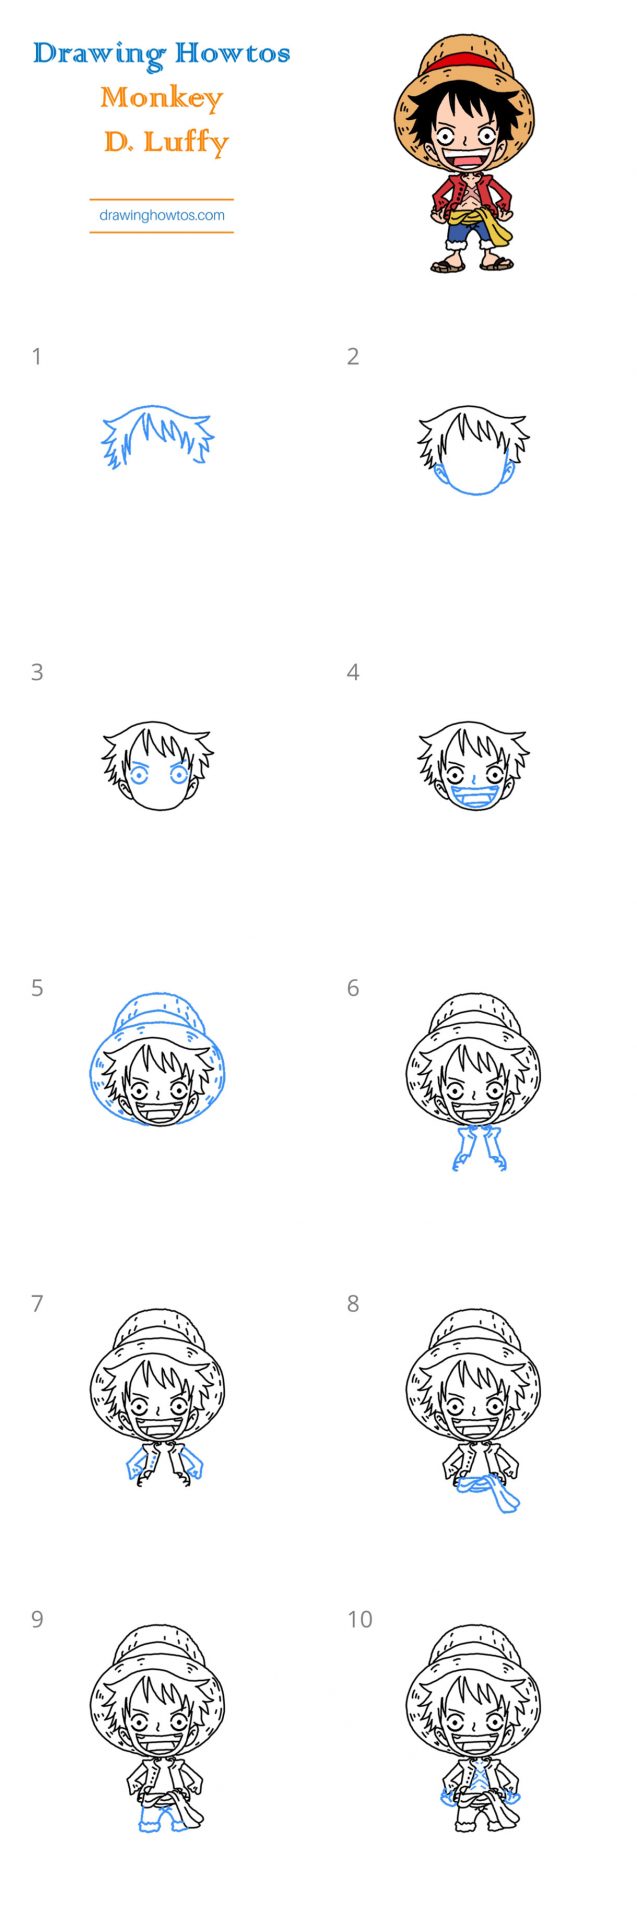 How to Draw Monkey D. Luffy Step by Step